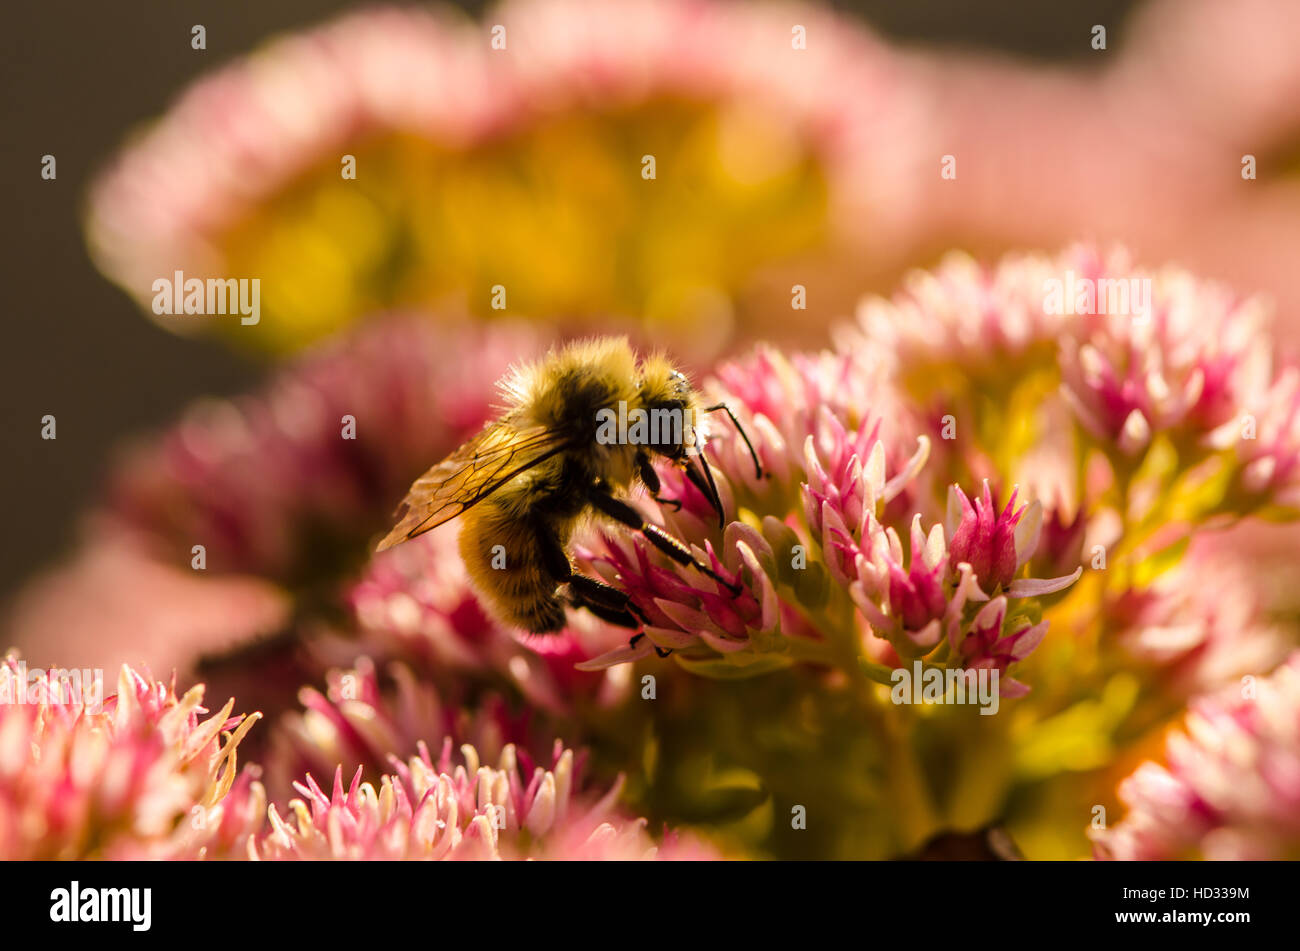 Bee collecting pollen on white and pink flowers Stock Photo